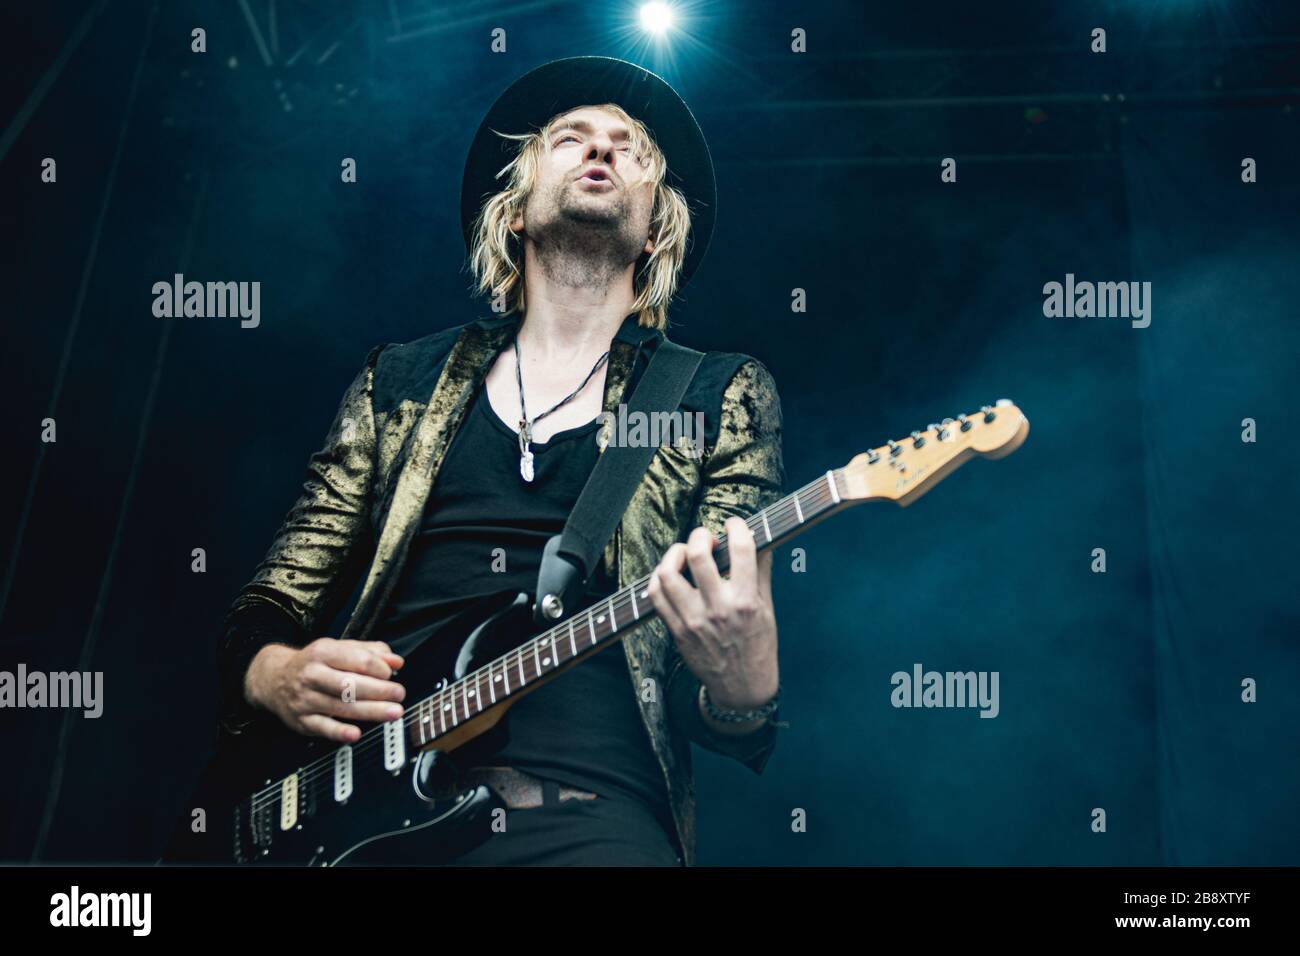 Copenhagen, Denmark. 22nd, June, 2017. The British hard rock band Inglorious performs a live during the Danish heavy metal music festival Copehell 2017 in Copenhagen. Here guitarist Drew Lowe is seen live on stage. (Photo credit: Gonzales Photo - Nikolaj Bransholm). Stock Photo